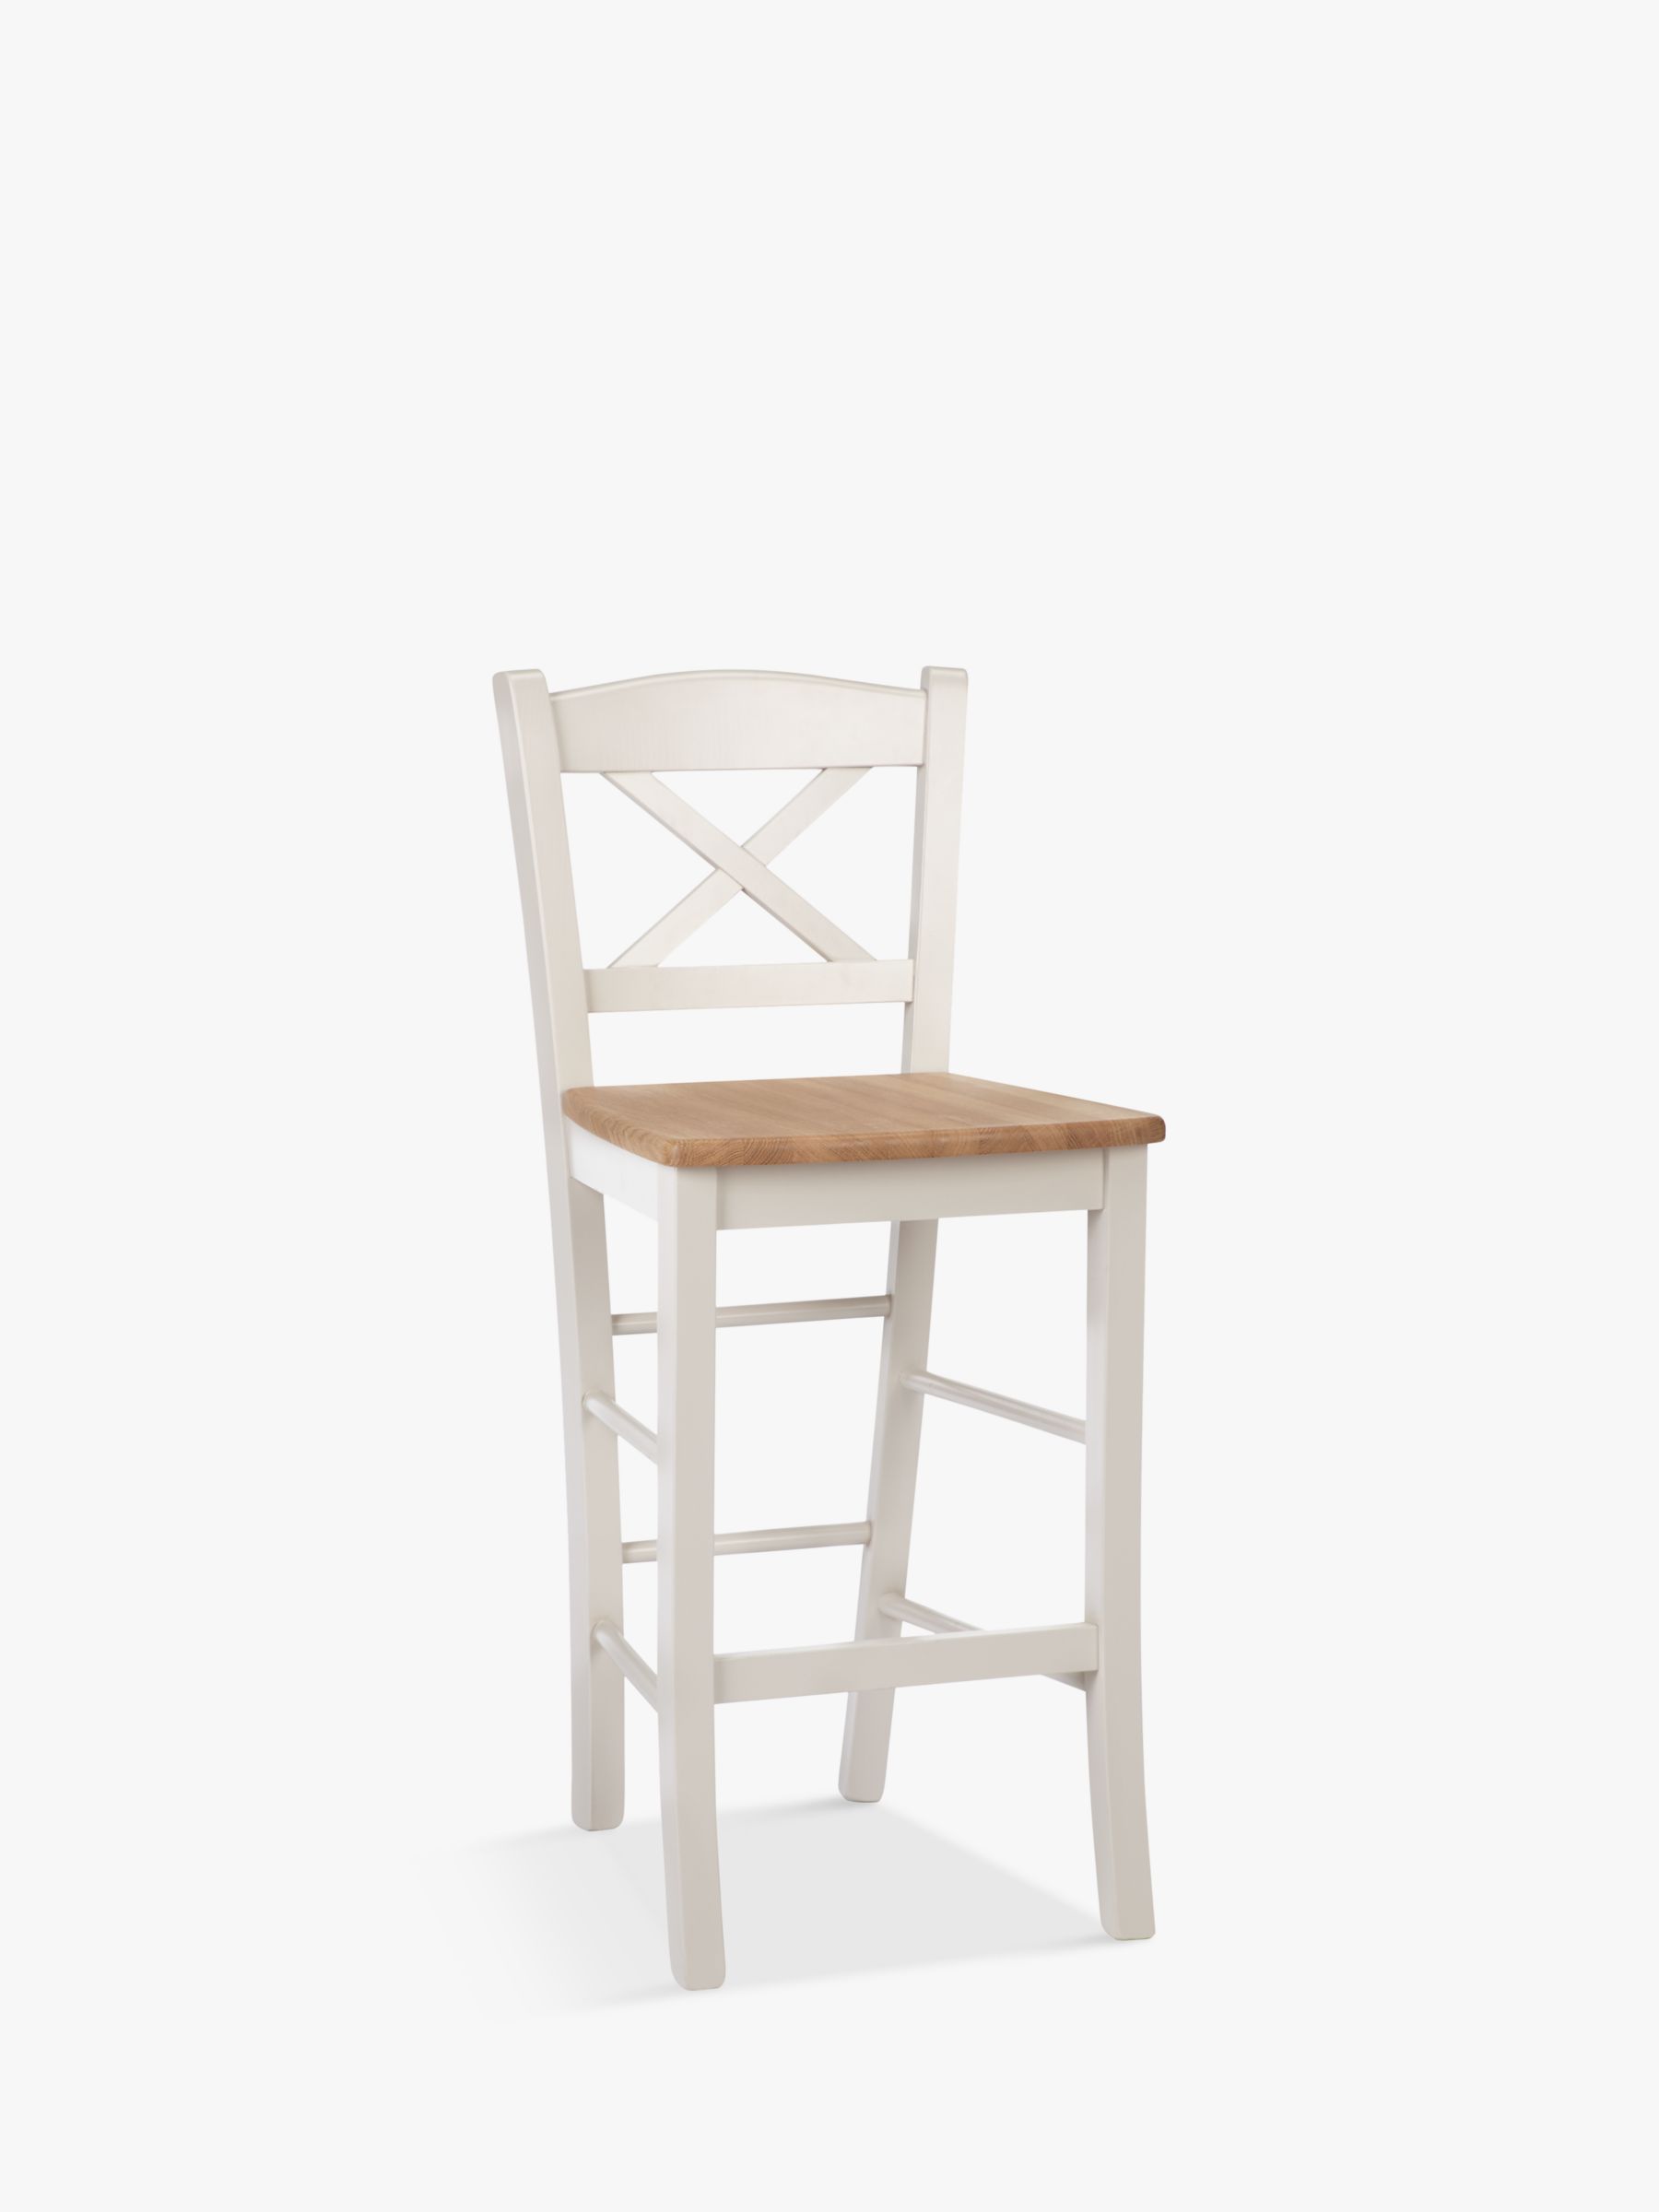 Bar Chairs Stools John Lewis Partners, White Wooden High Back Bar Stools With Backs